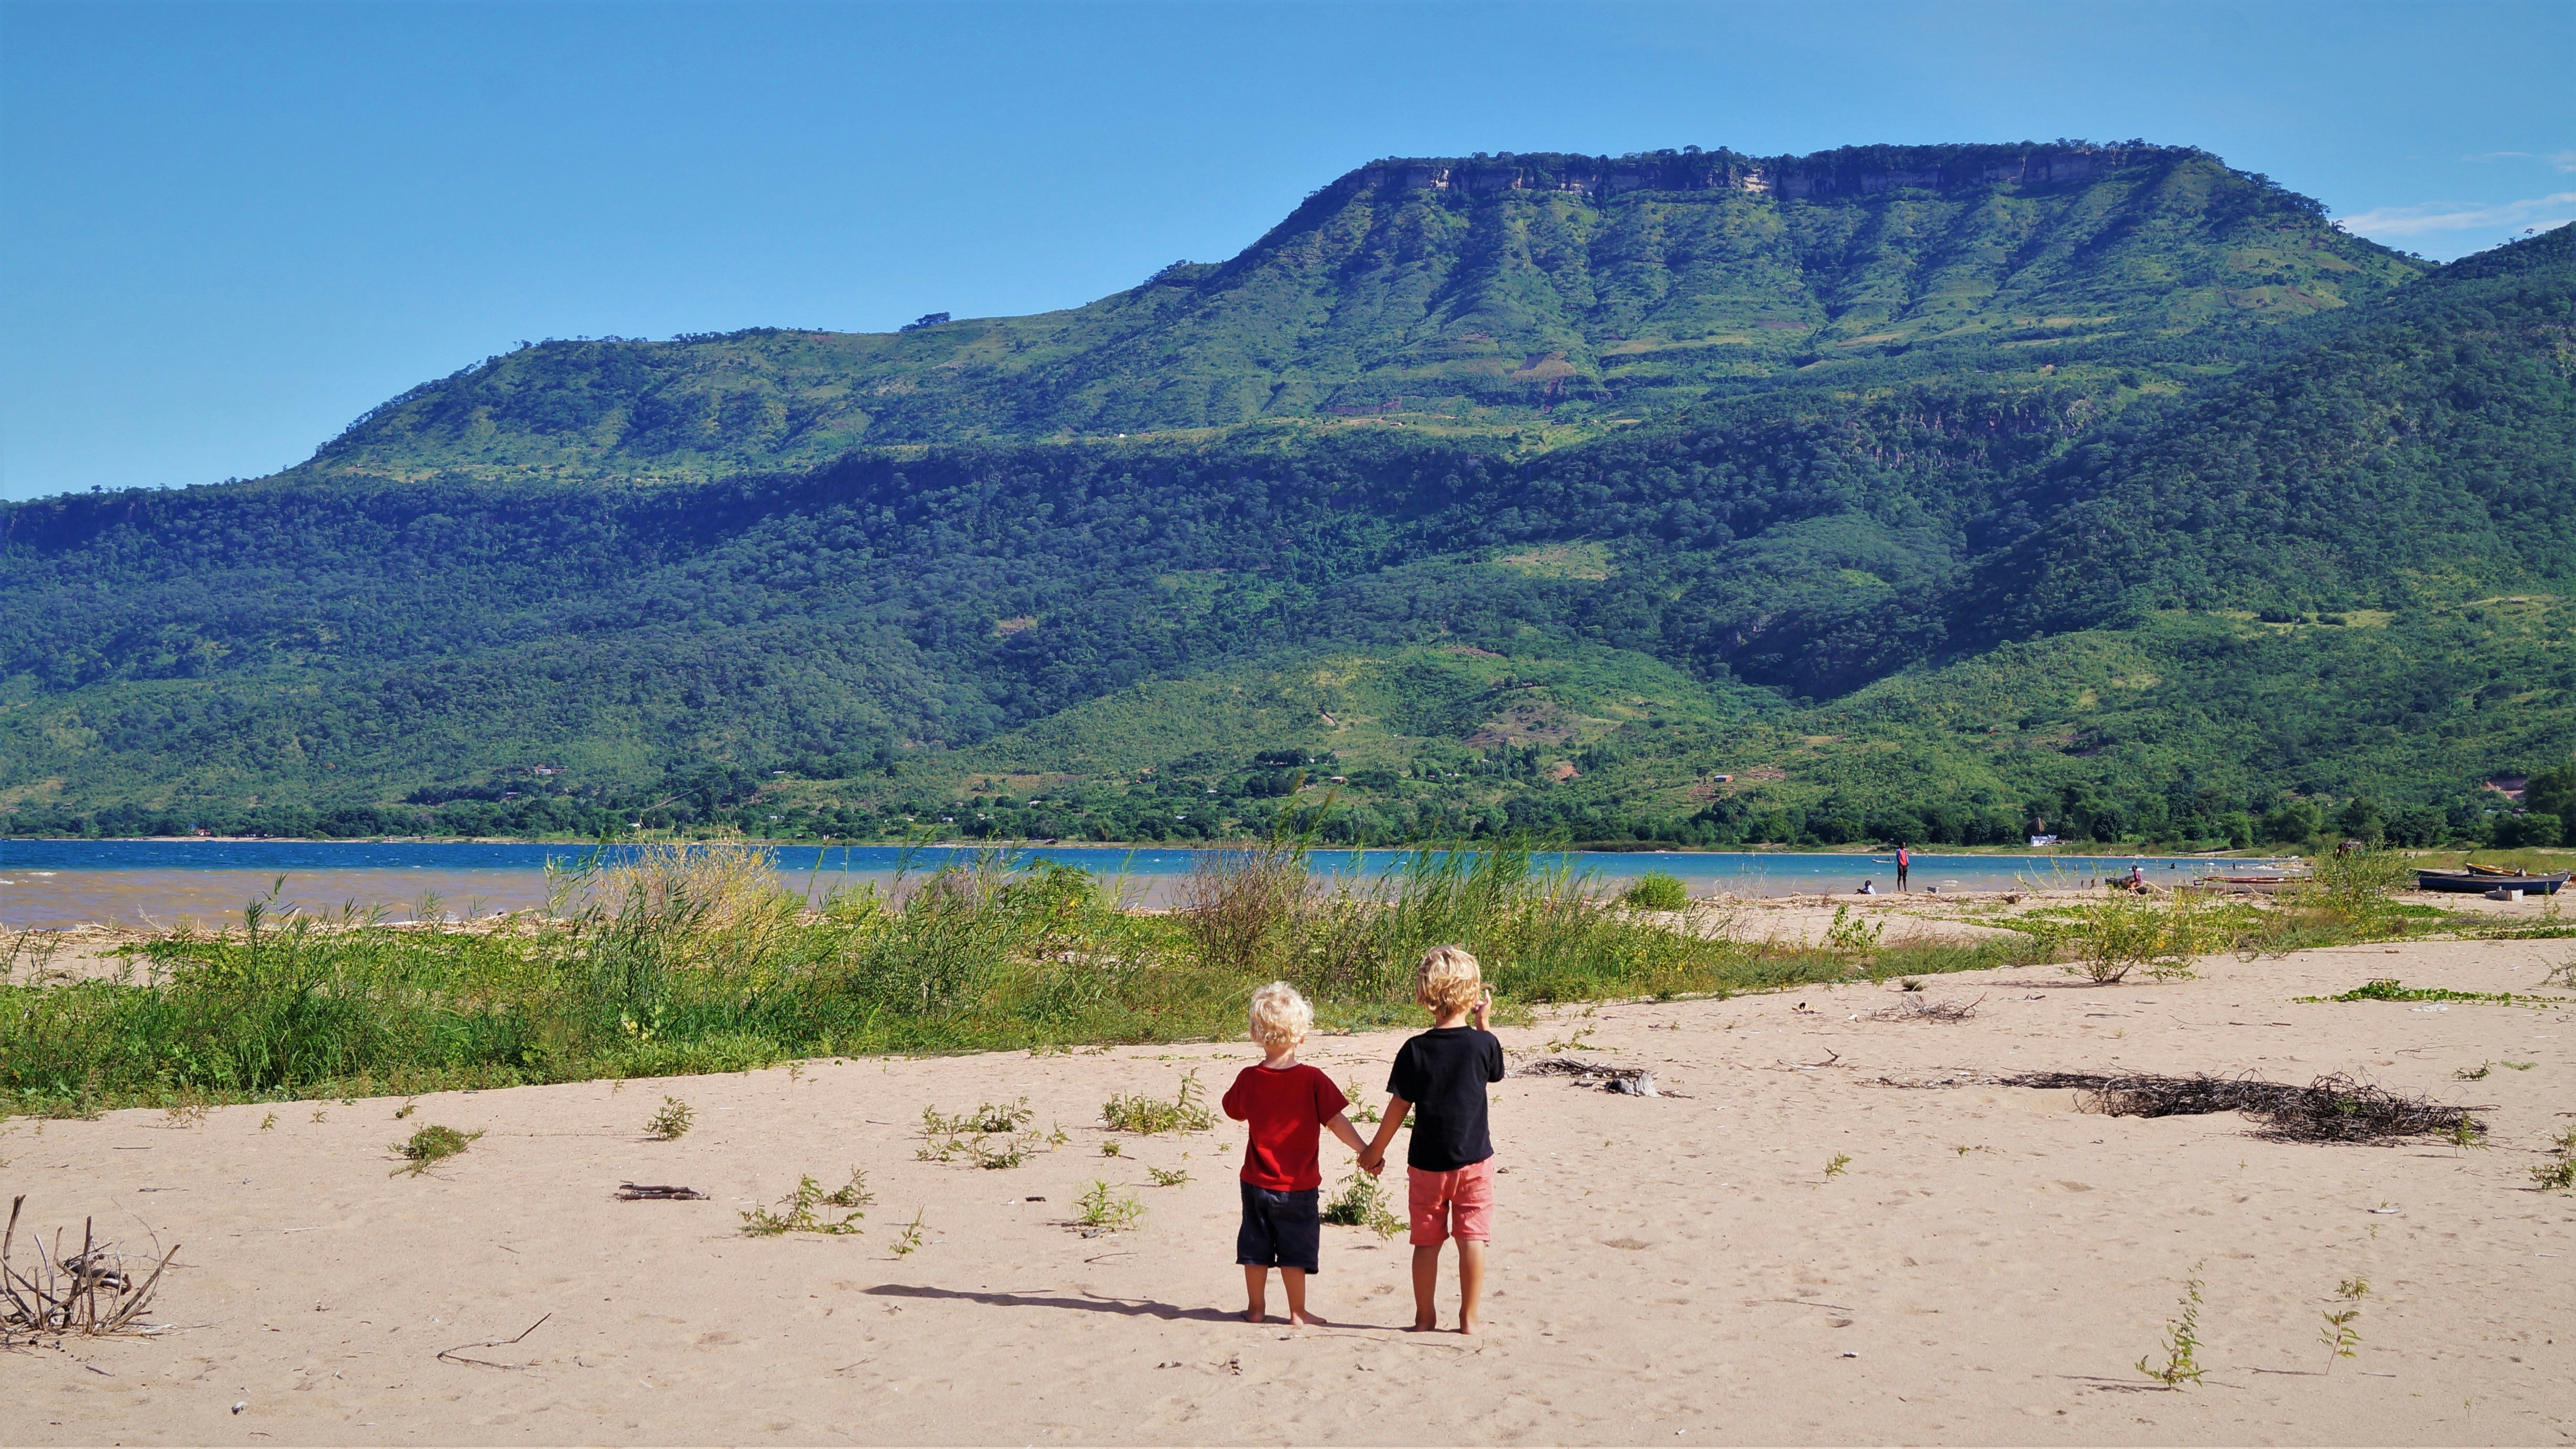 Two small boys holding hands look on at a lush, green hill. A body of water is in front of the hill and the sky is blue.